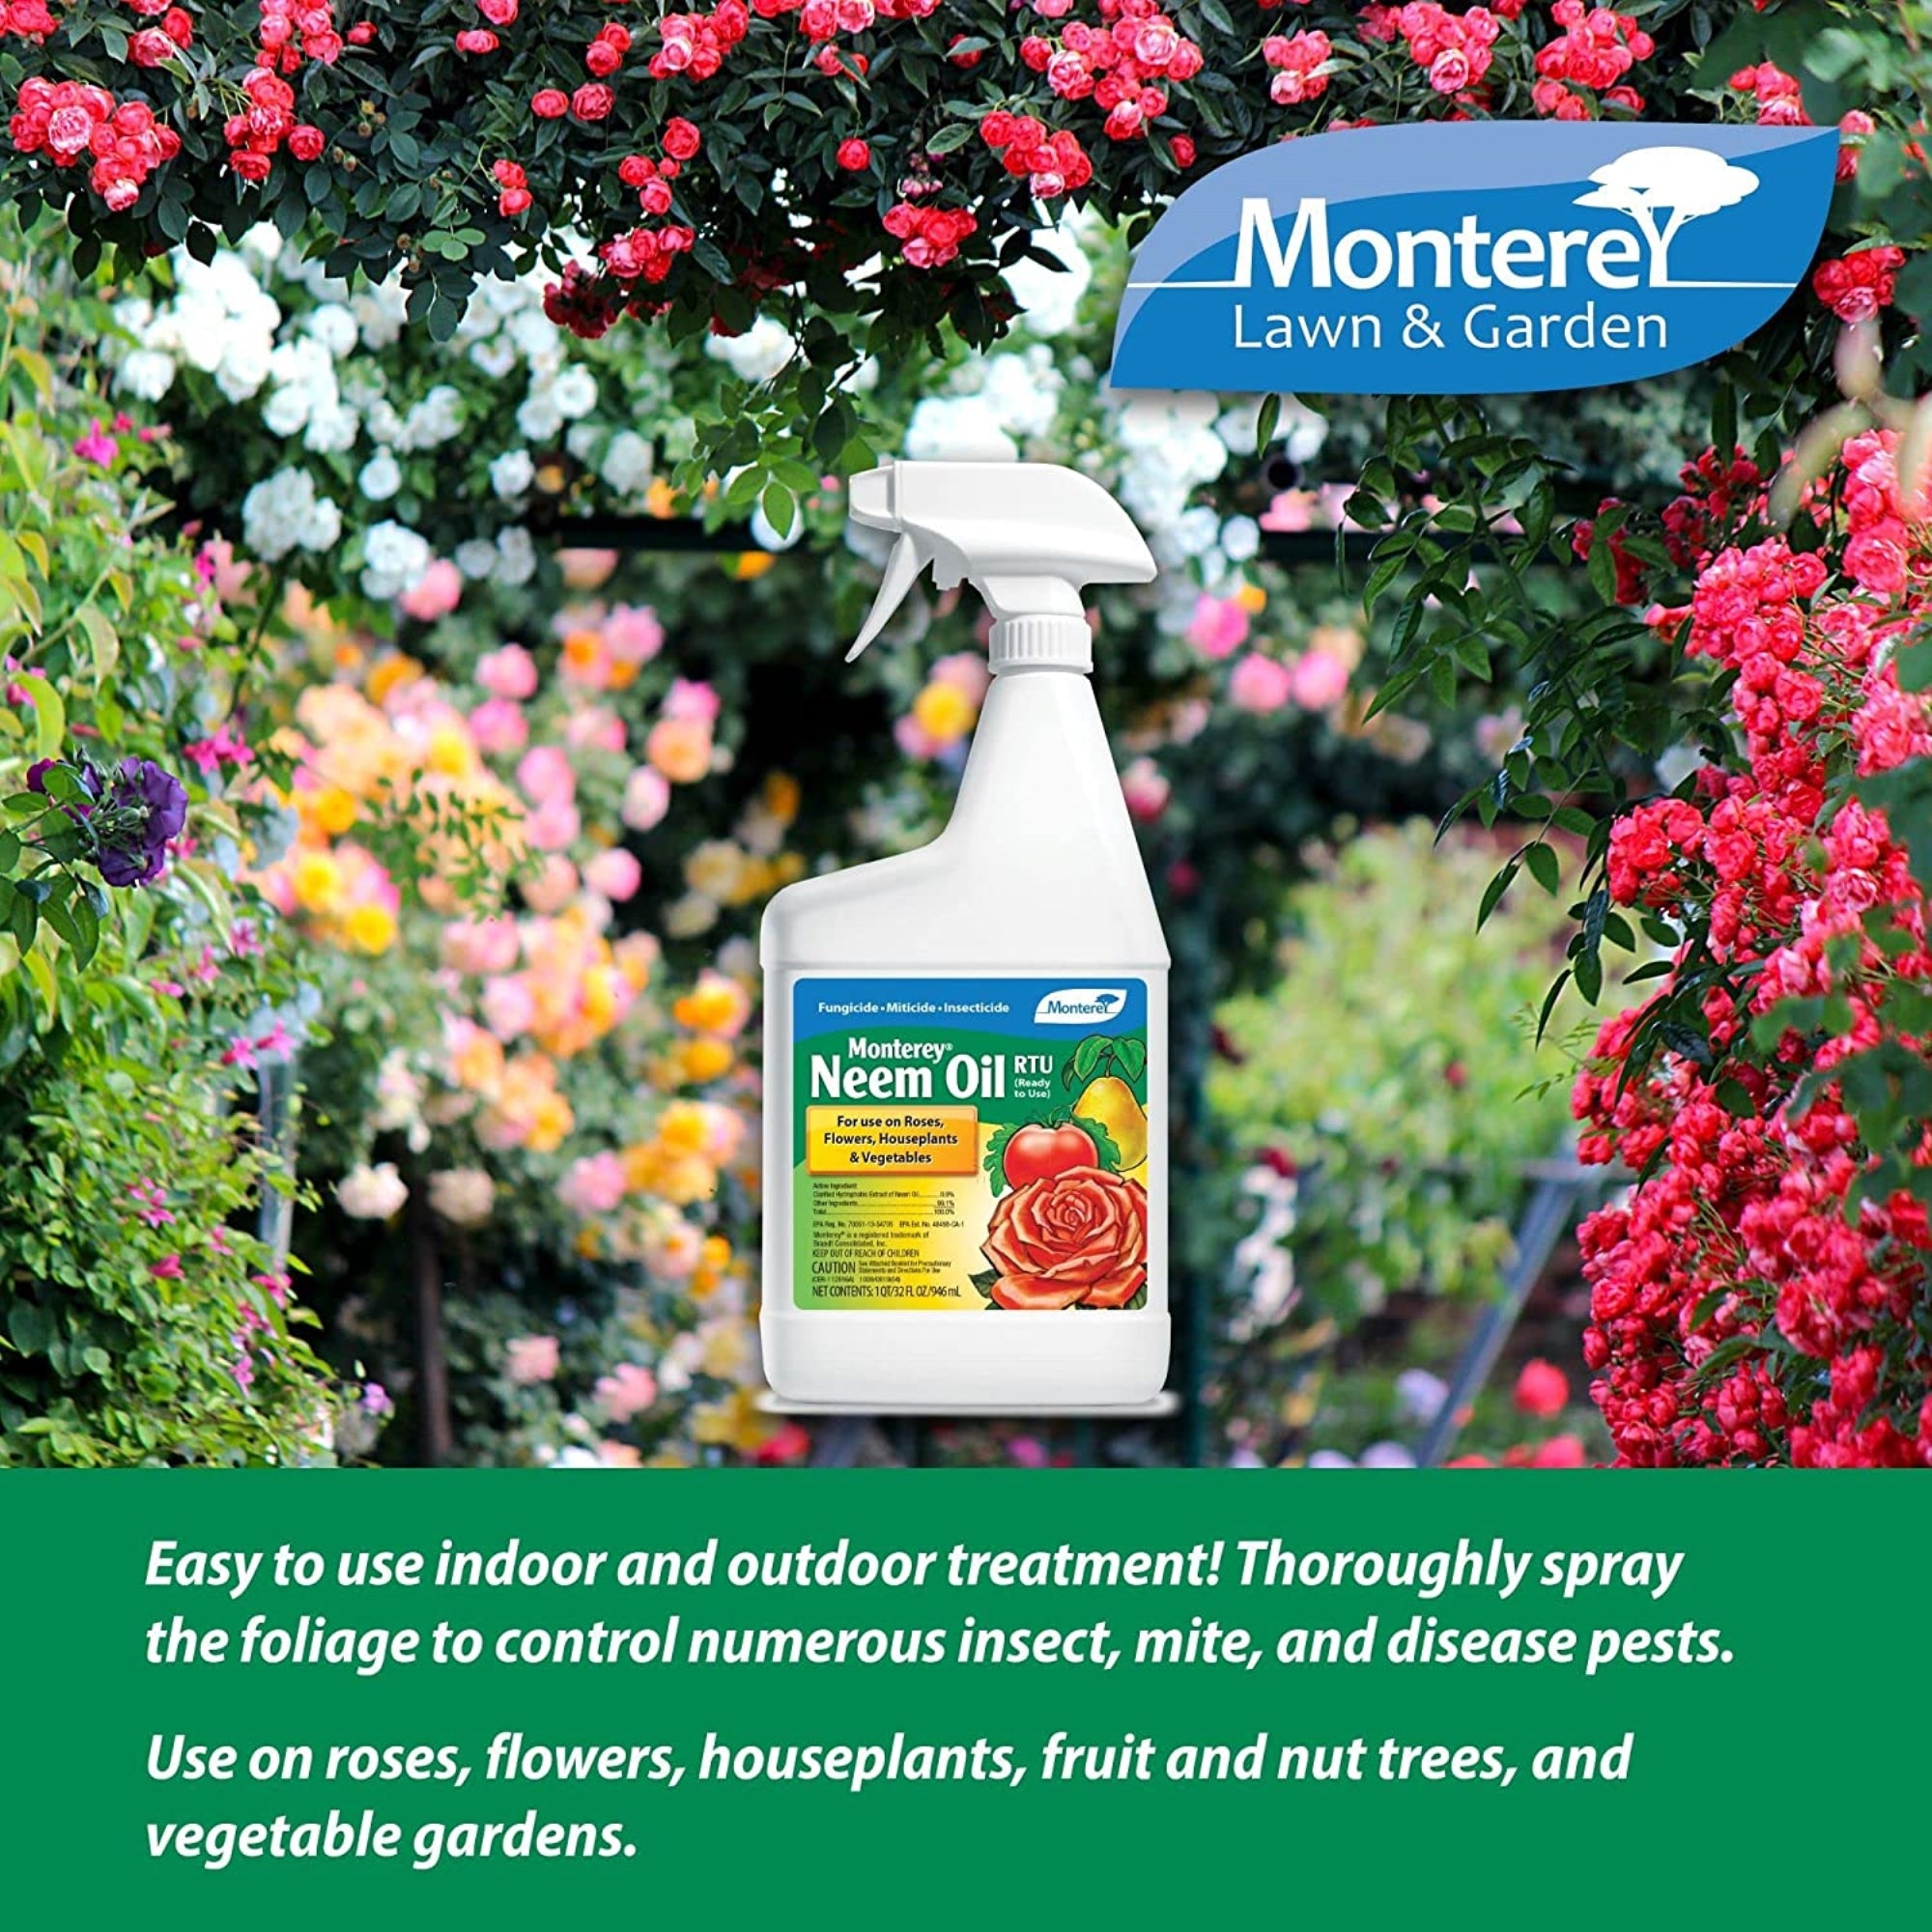 Monterey Neem Oil Ready to Use Spray,  Insecticide, Miticide & Fungicide, 32 oz